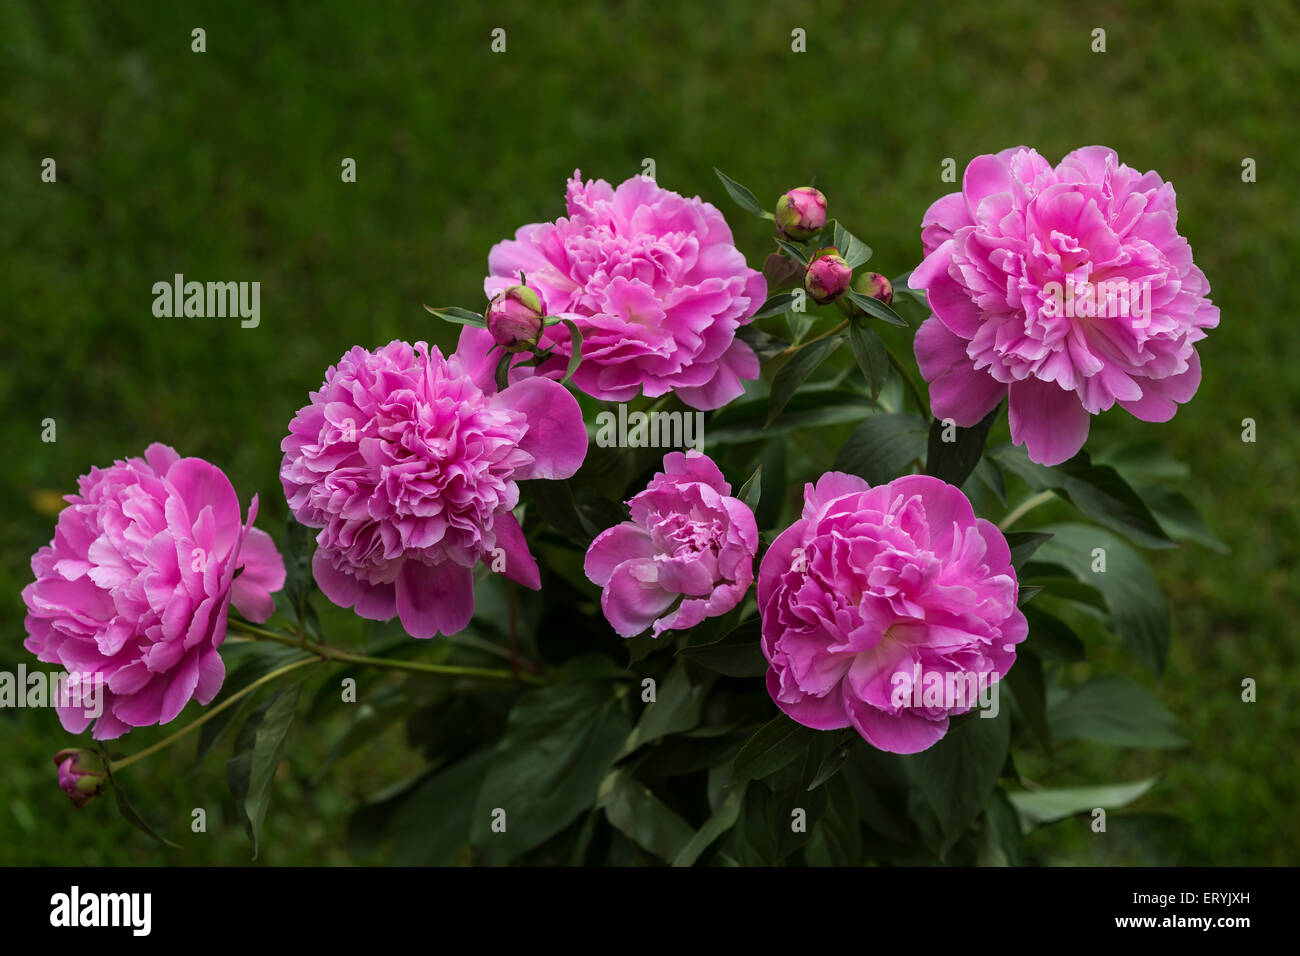 Bouquet of peonies with green background Stock Photo